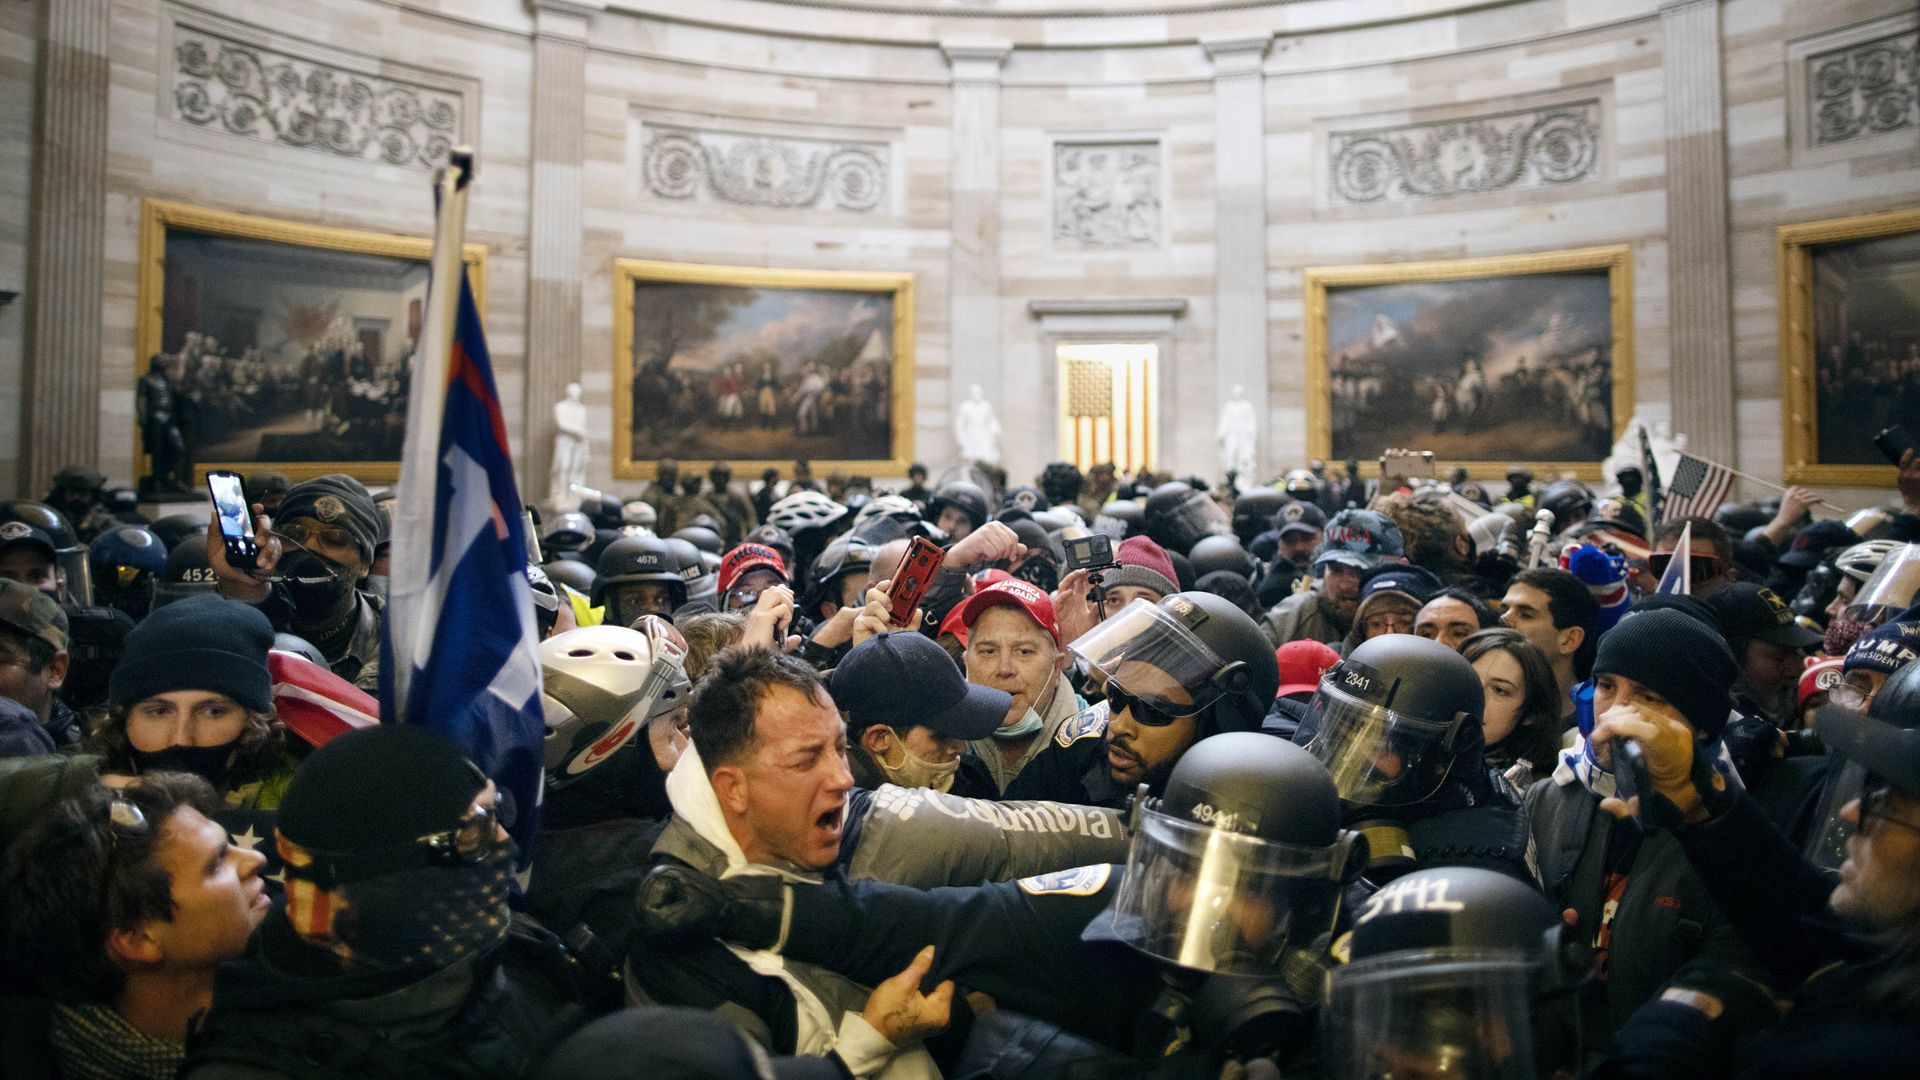 JANUARY 6: Police clash with supporters of US President Donald Trump who breached security and entered the Capitol building 